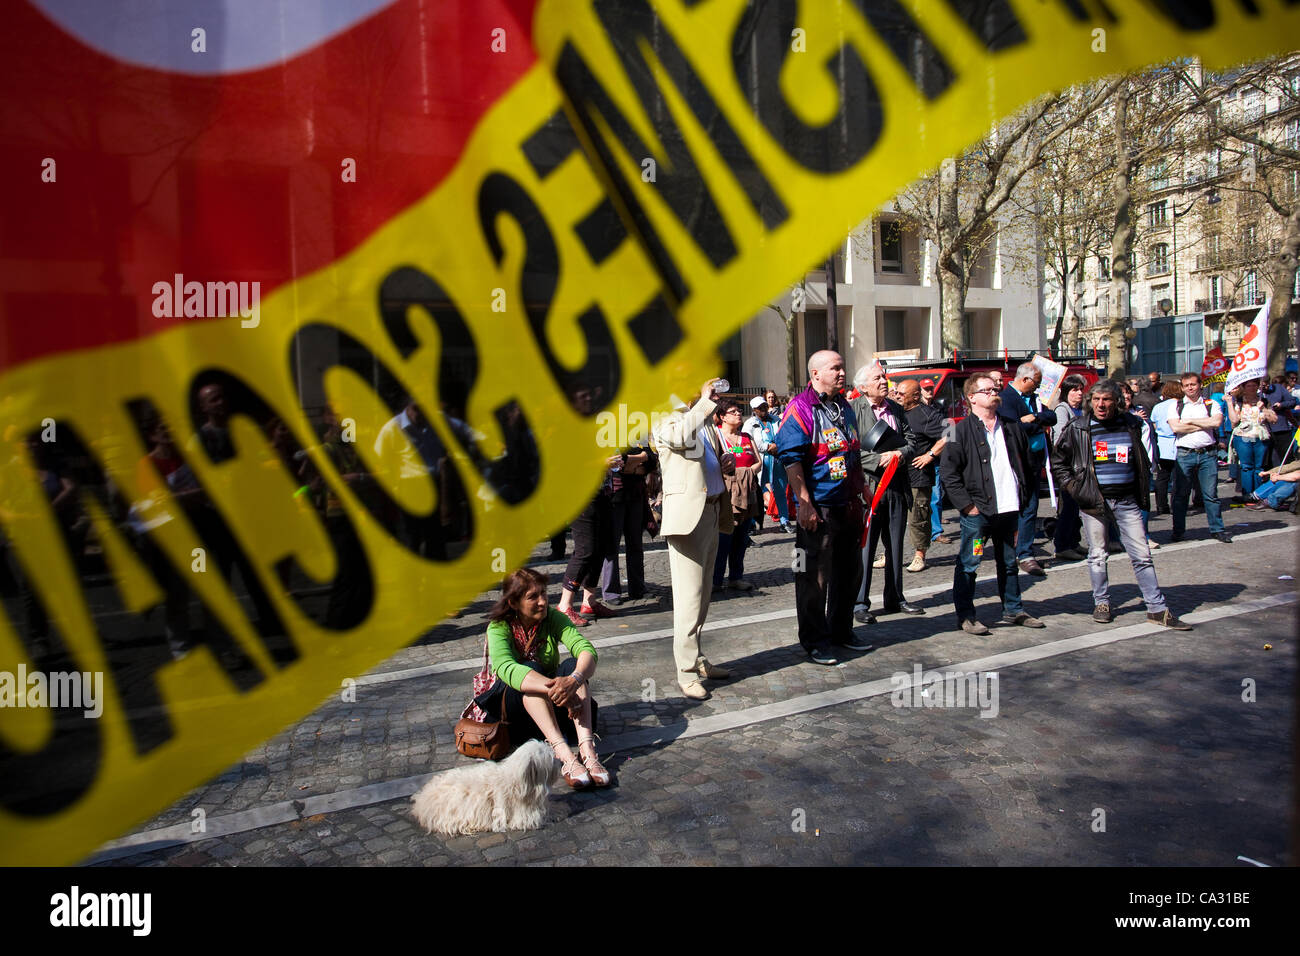 Paris, France. 29.03.2012. Picture shows the General Confederation of Labour (CGT), one of the major French confederations of trade unions, demonstrating against cuts outside the Ministry of Health, Paris headquarters. Stock Photo